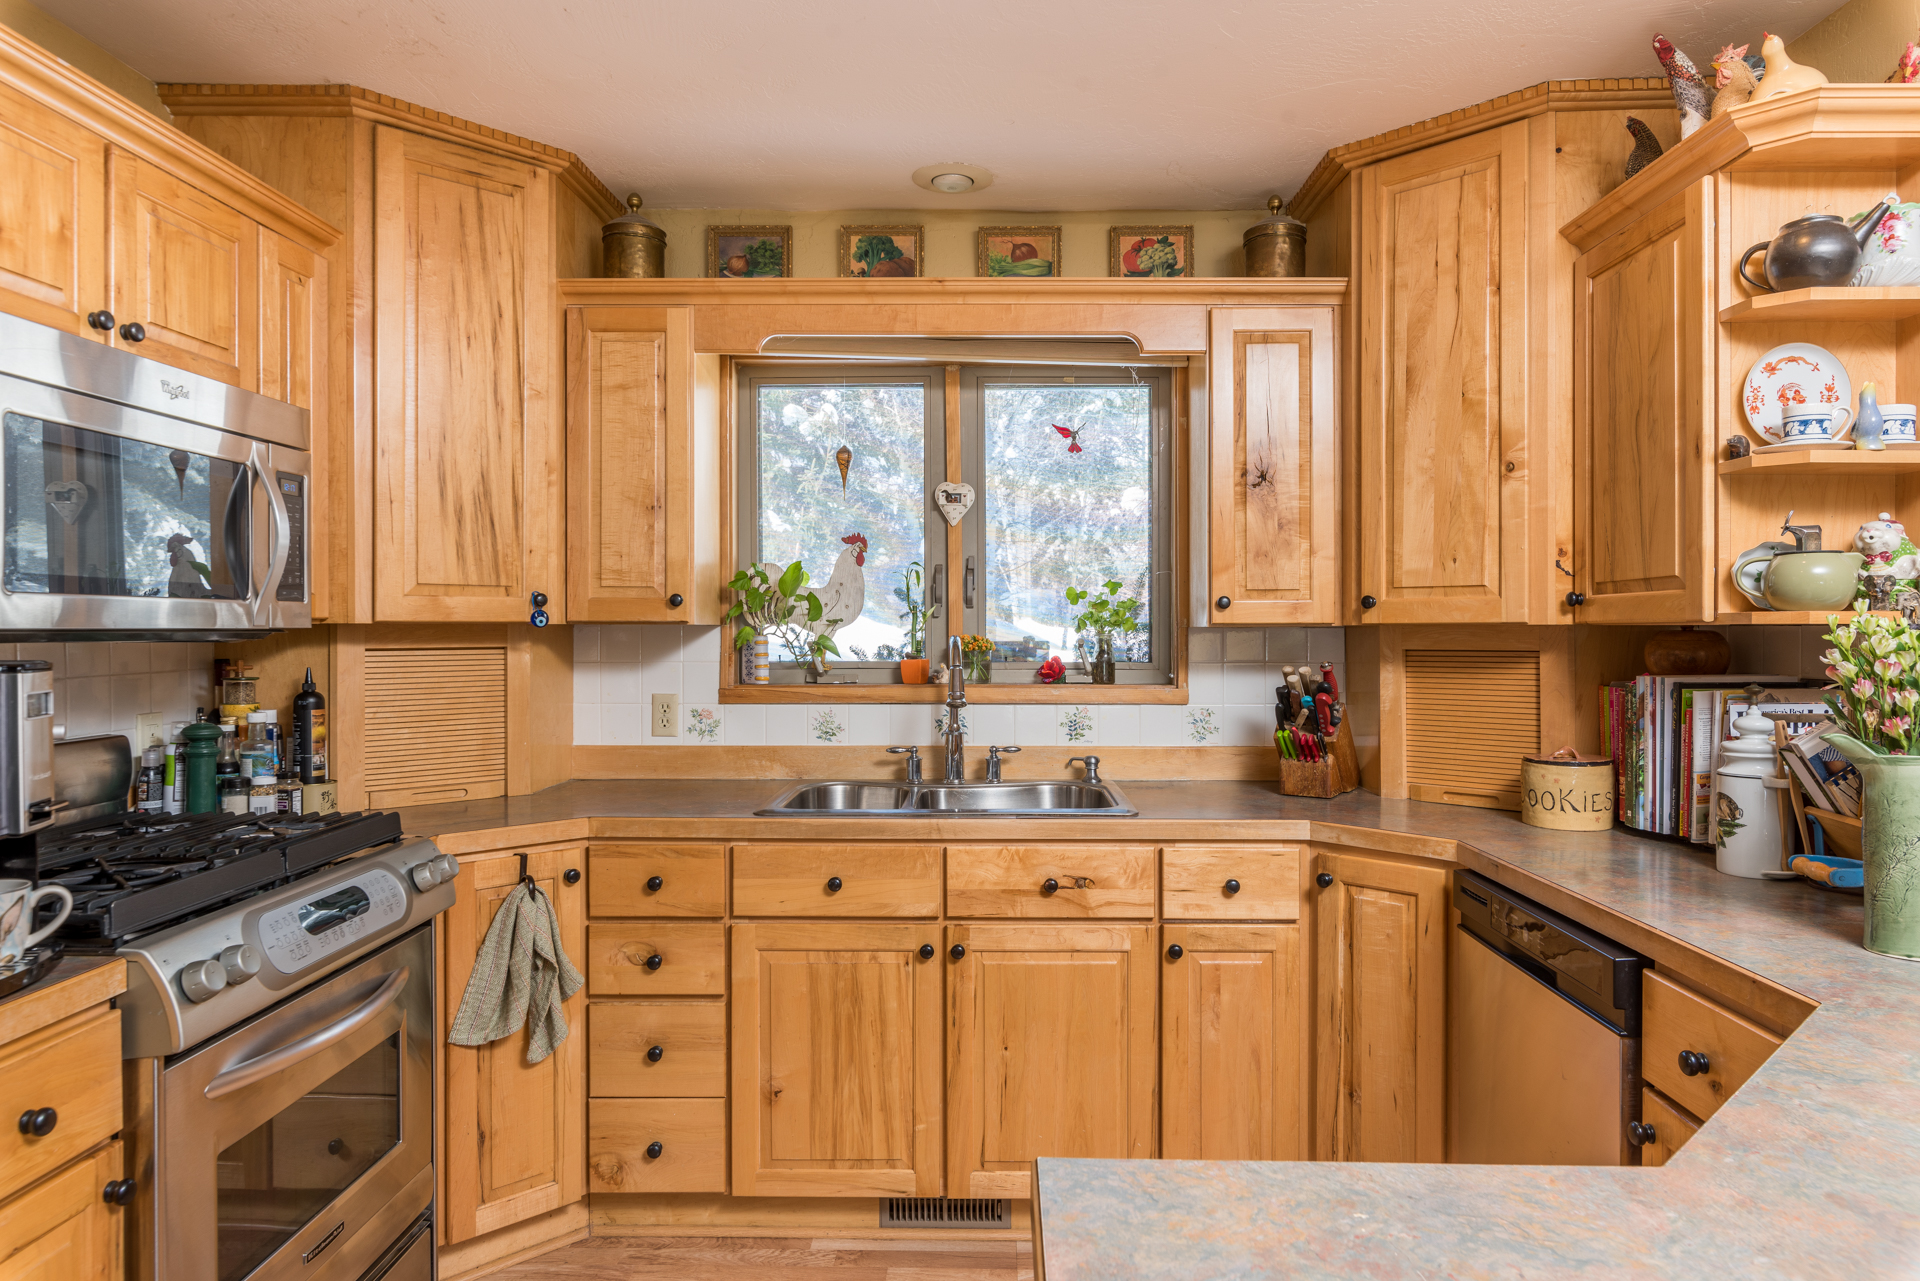 Custom Wood Cabinets and Stainless Appliances in this Featured Home near Sun Valley, Idaho 